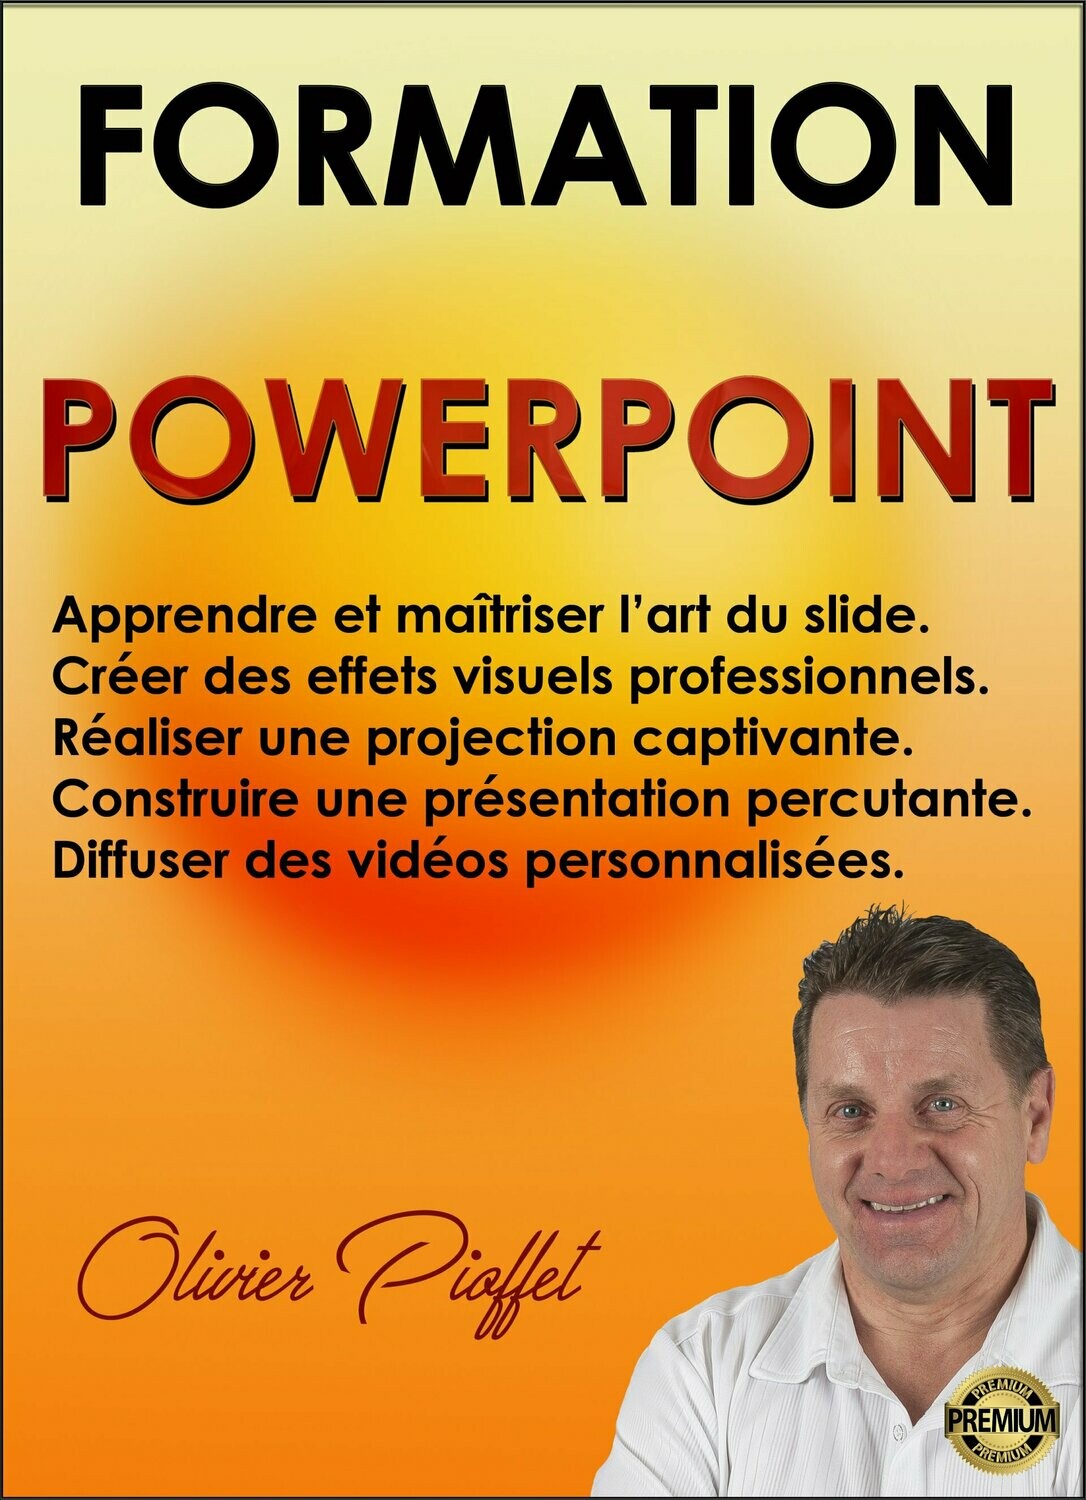 FORMATION POWERPOINT LIGHT 6 h